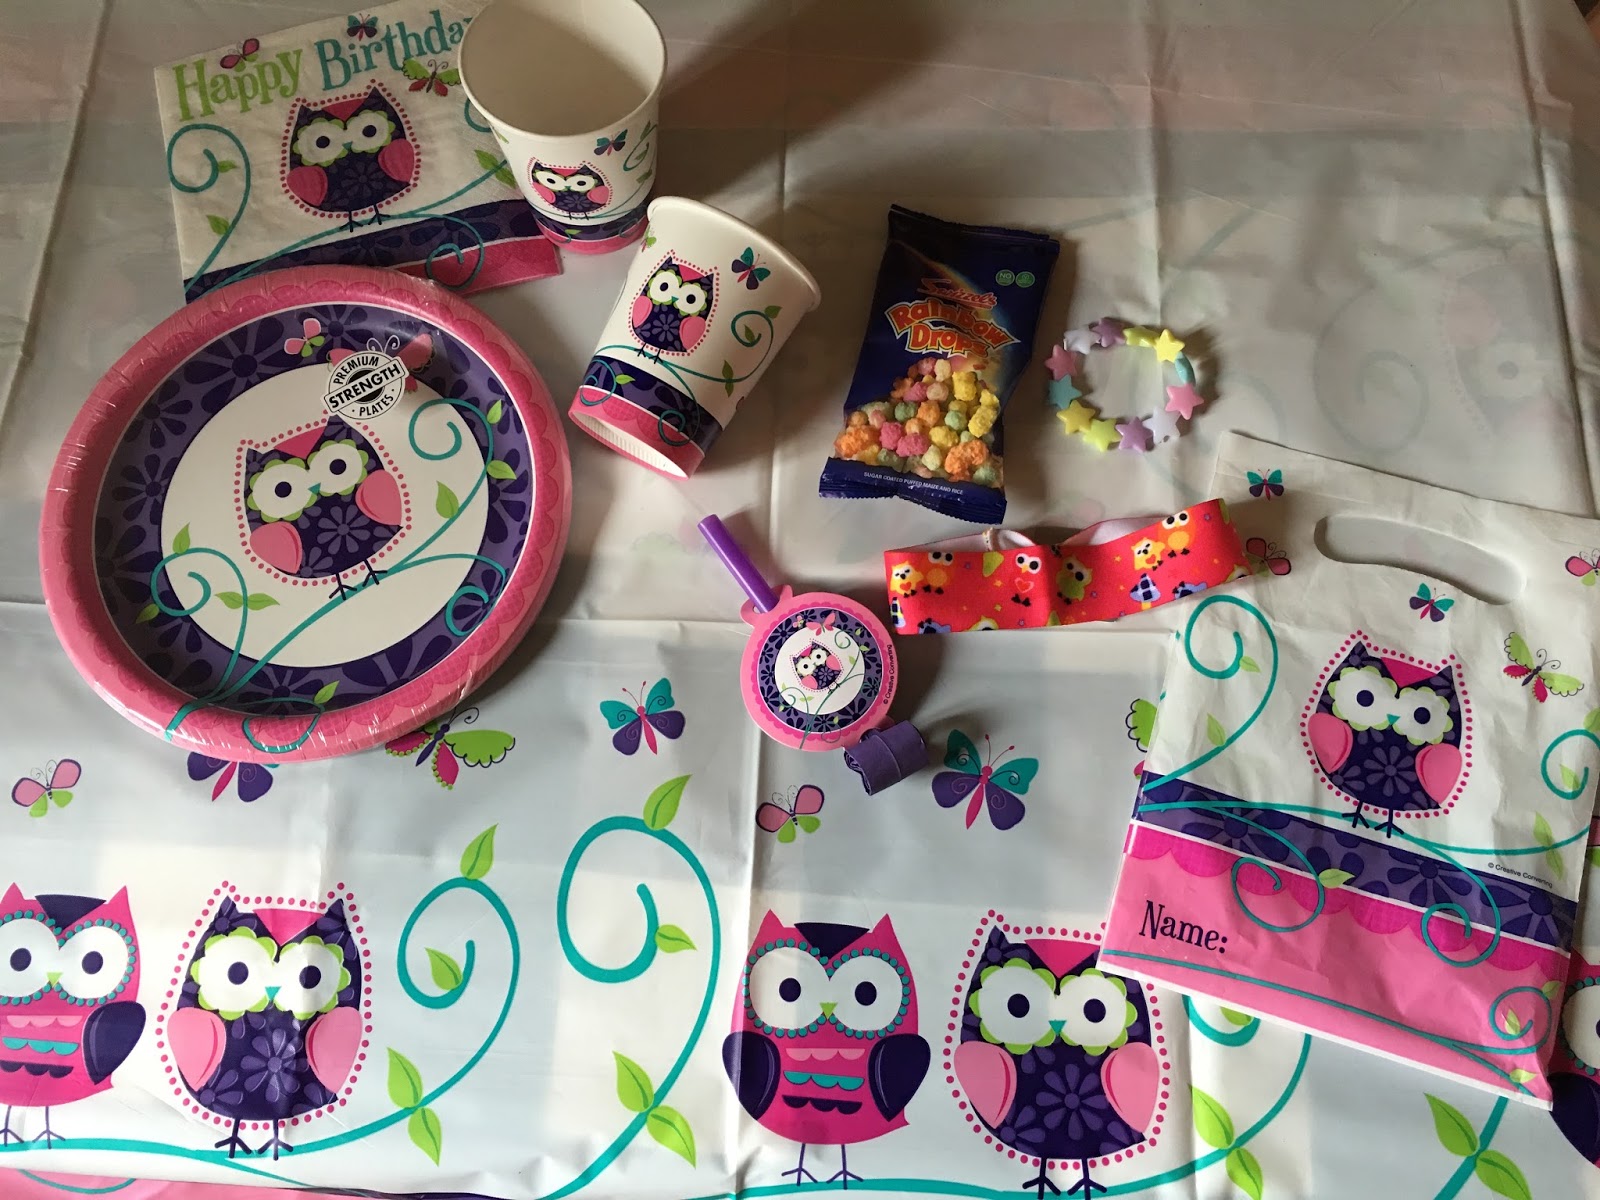 a-birthday-owl-themed-party-for-my-daughter-review